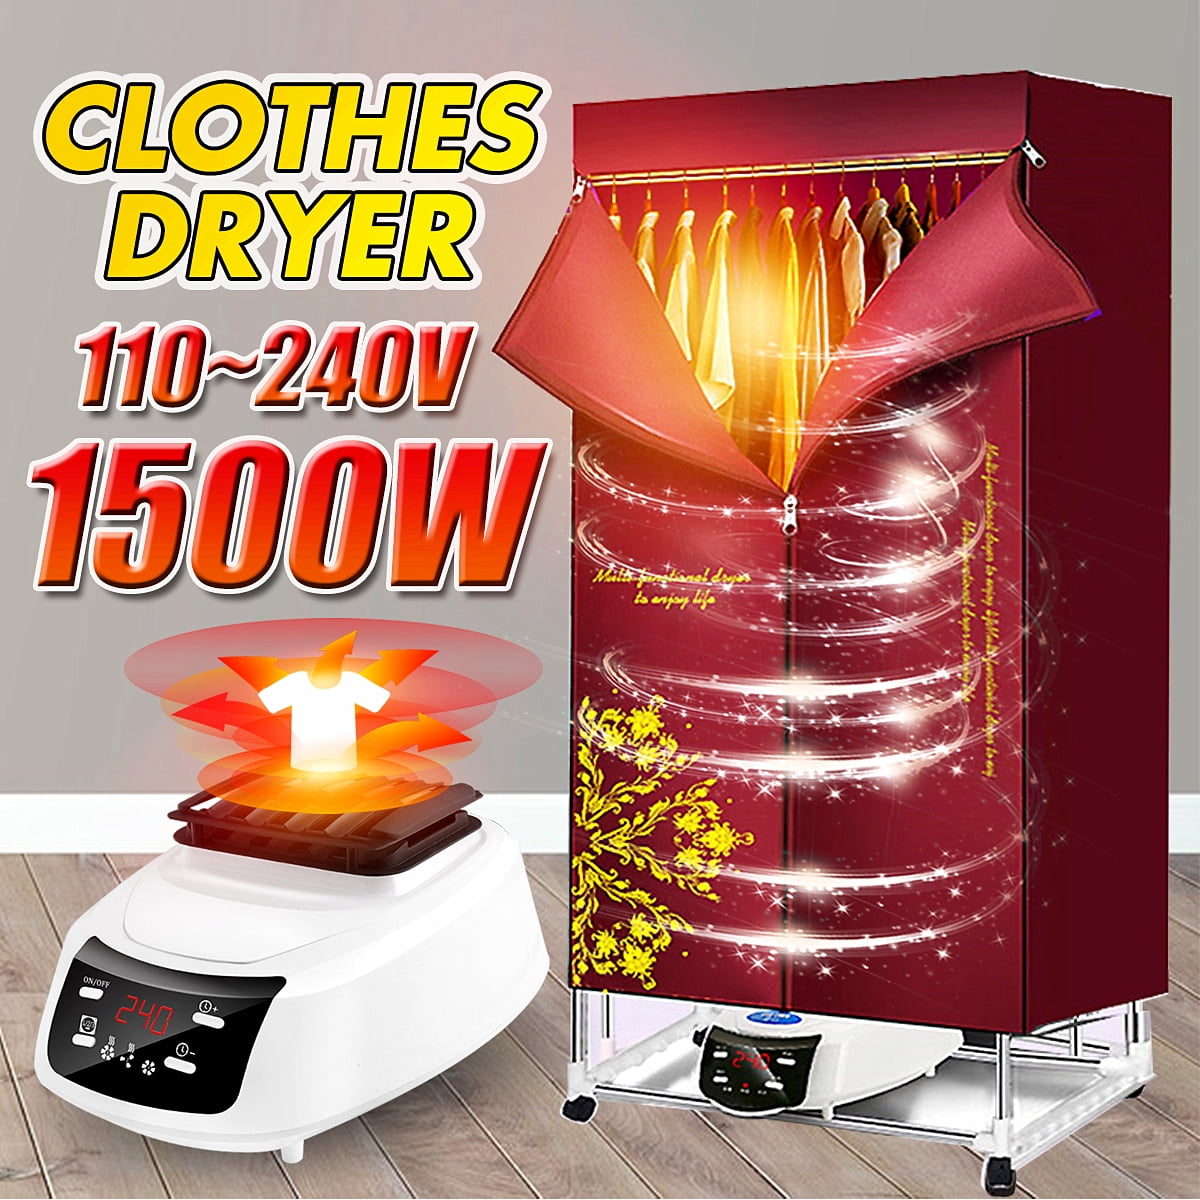 Portable Clothes Dryer Electric Ventless Folding Laundry Drying Machine Heater 